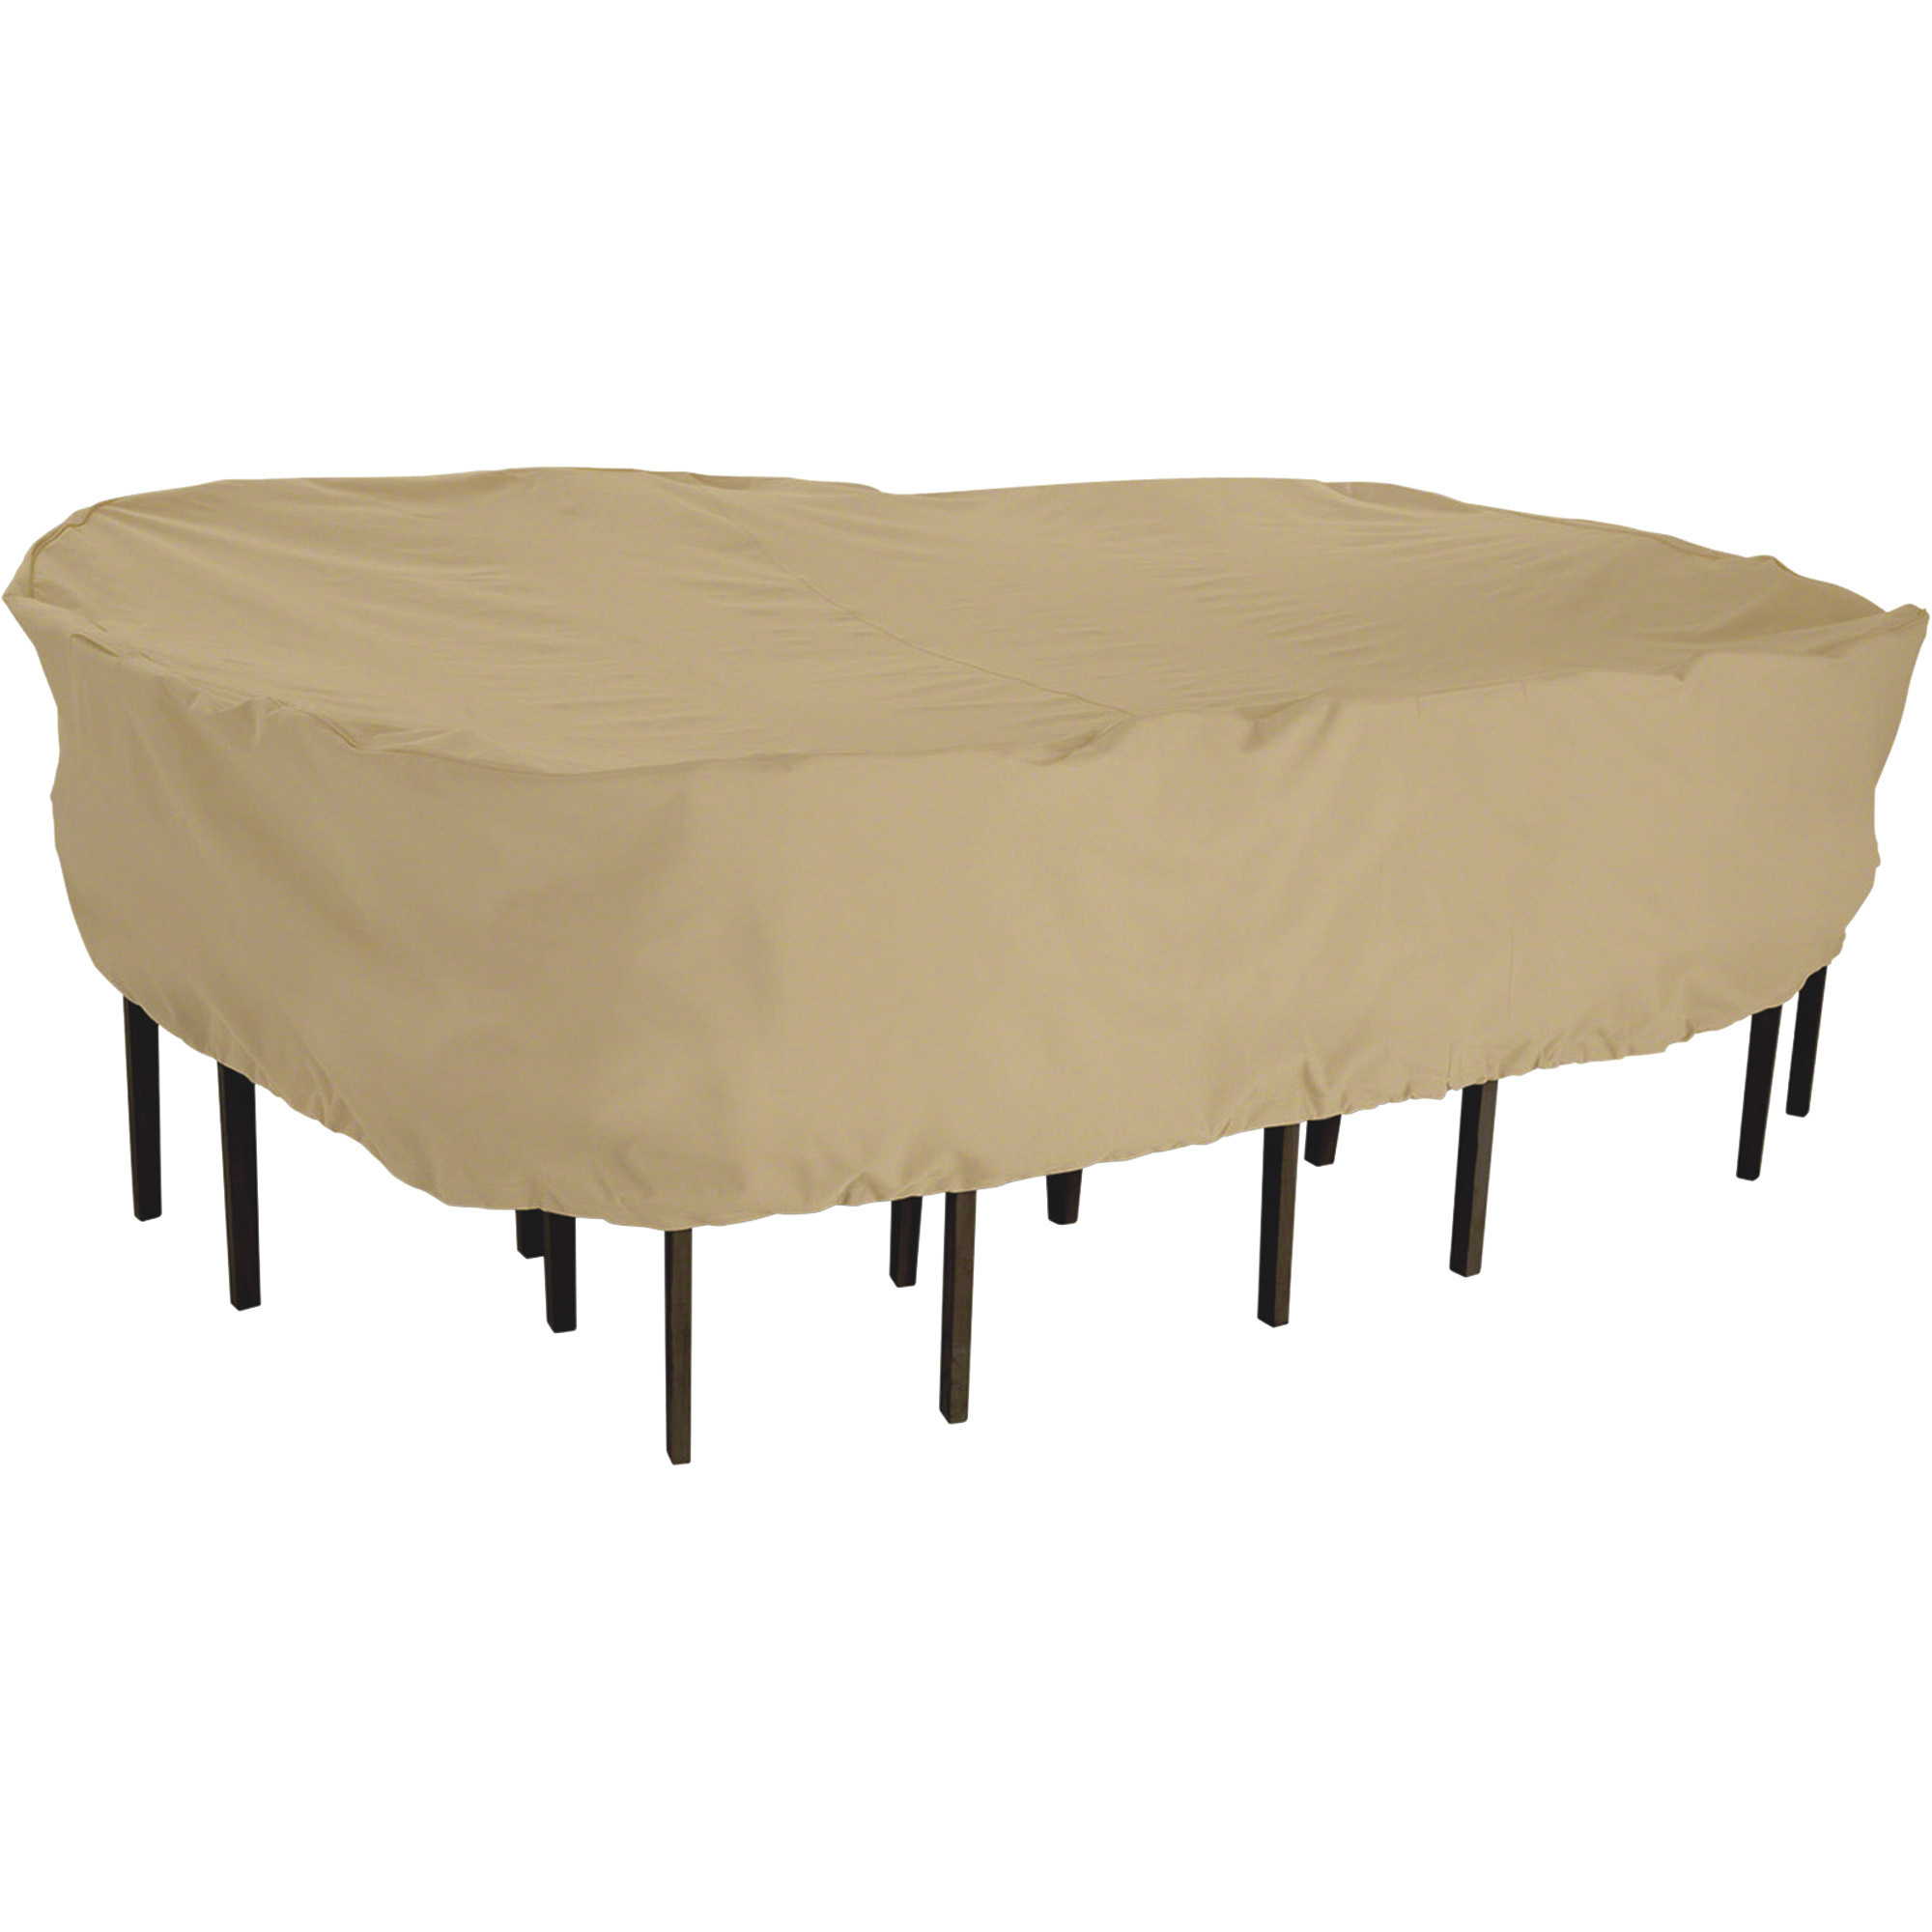 Classic Accessories Terrazzo Rectangular/Oval Patio Table & Chair Set Cover, Large, Sand, Model 58262-EC